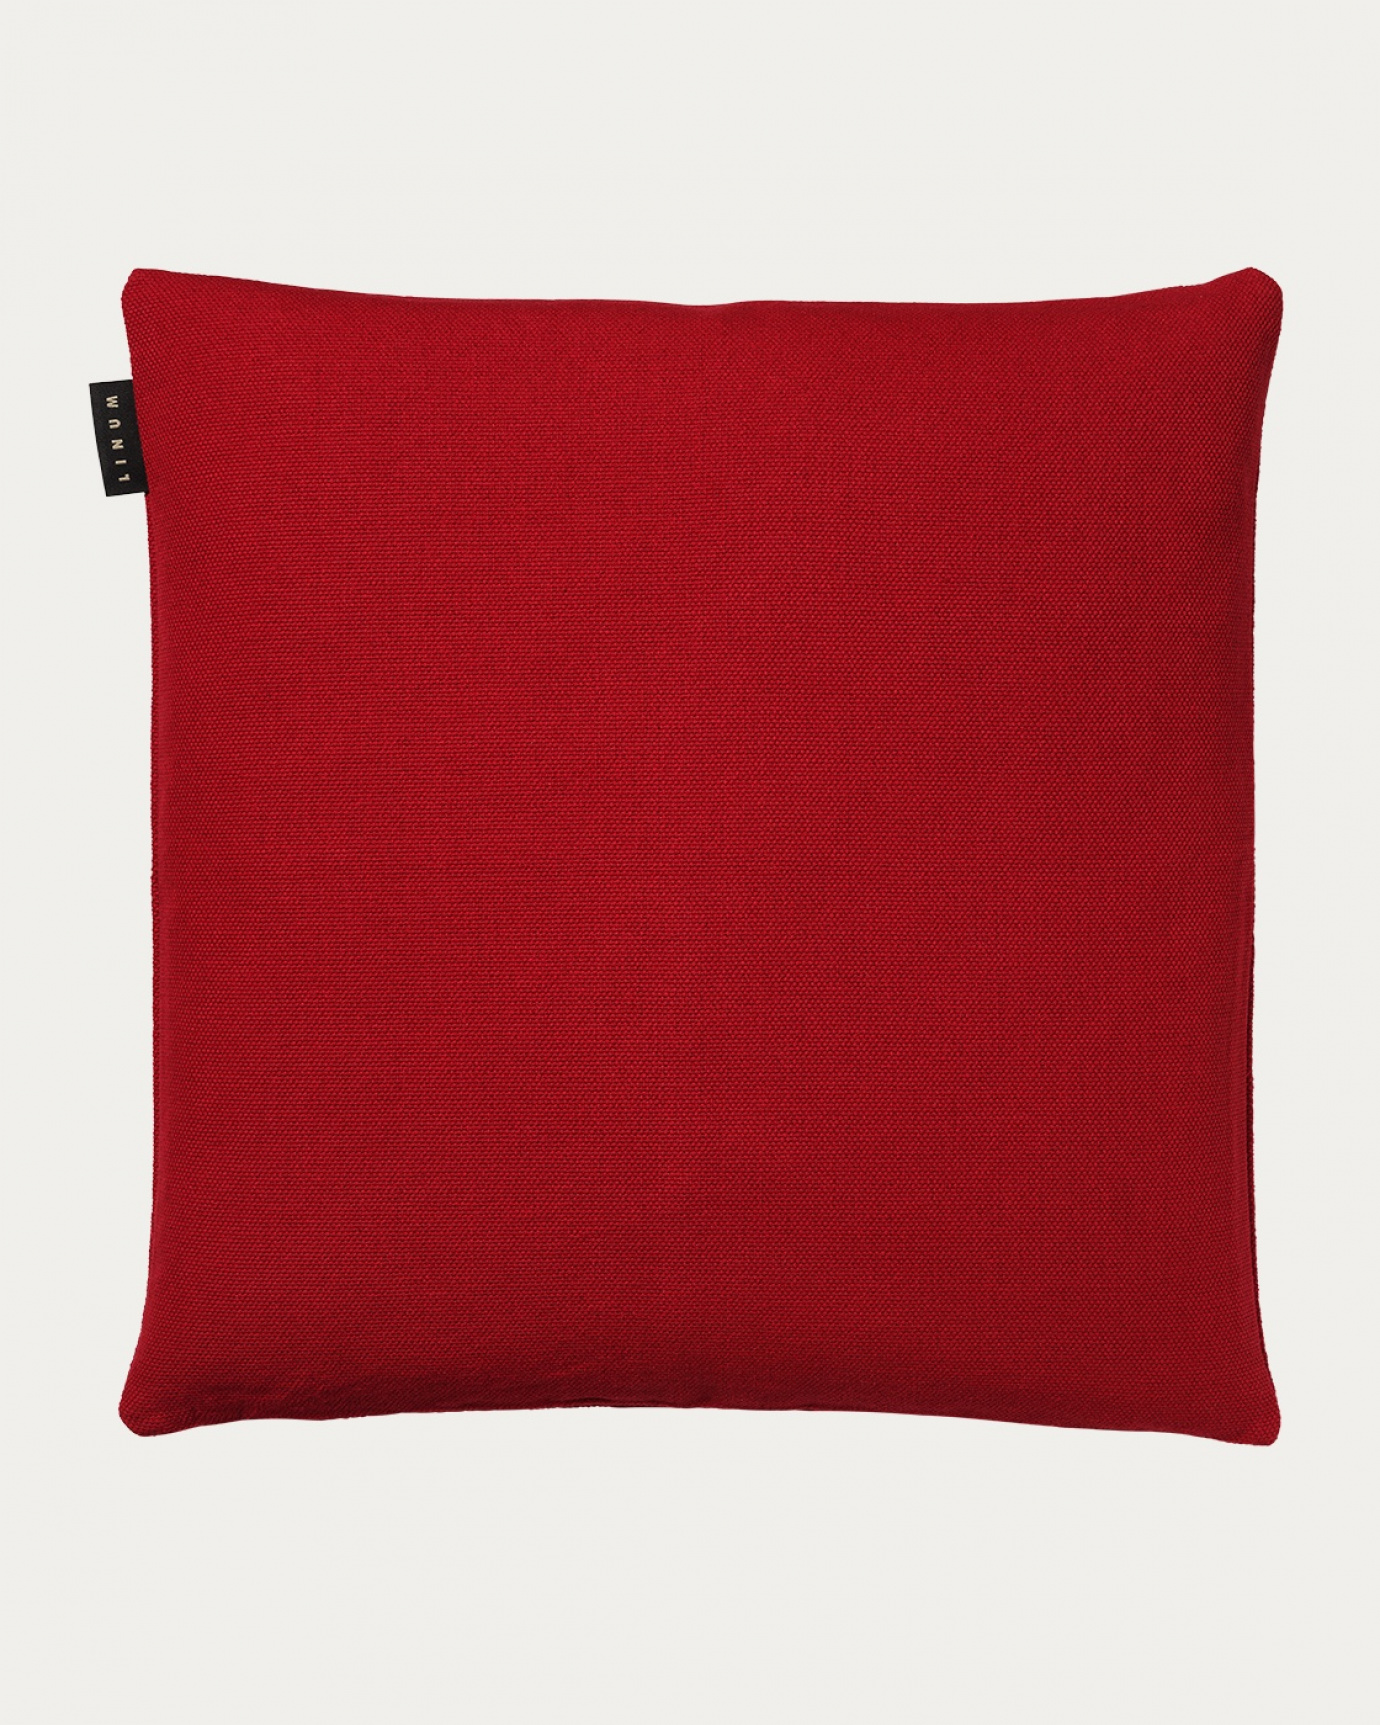 Product image red PEPPER cushion cover made of soft cotton from LINUM DESIGN. Easy to wash and durable for generations. Size 60x60 cm.